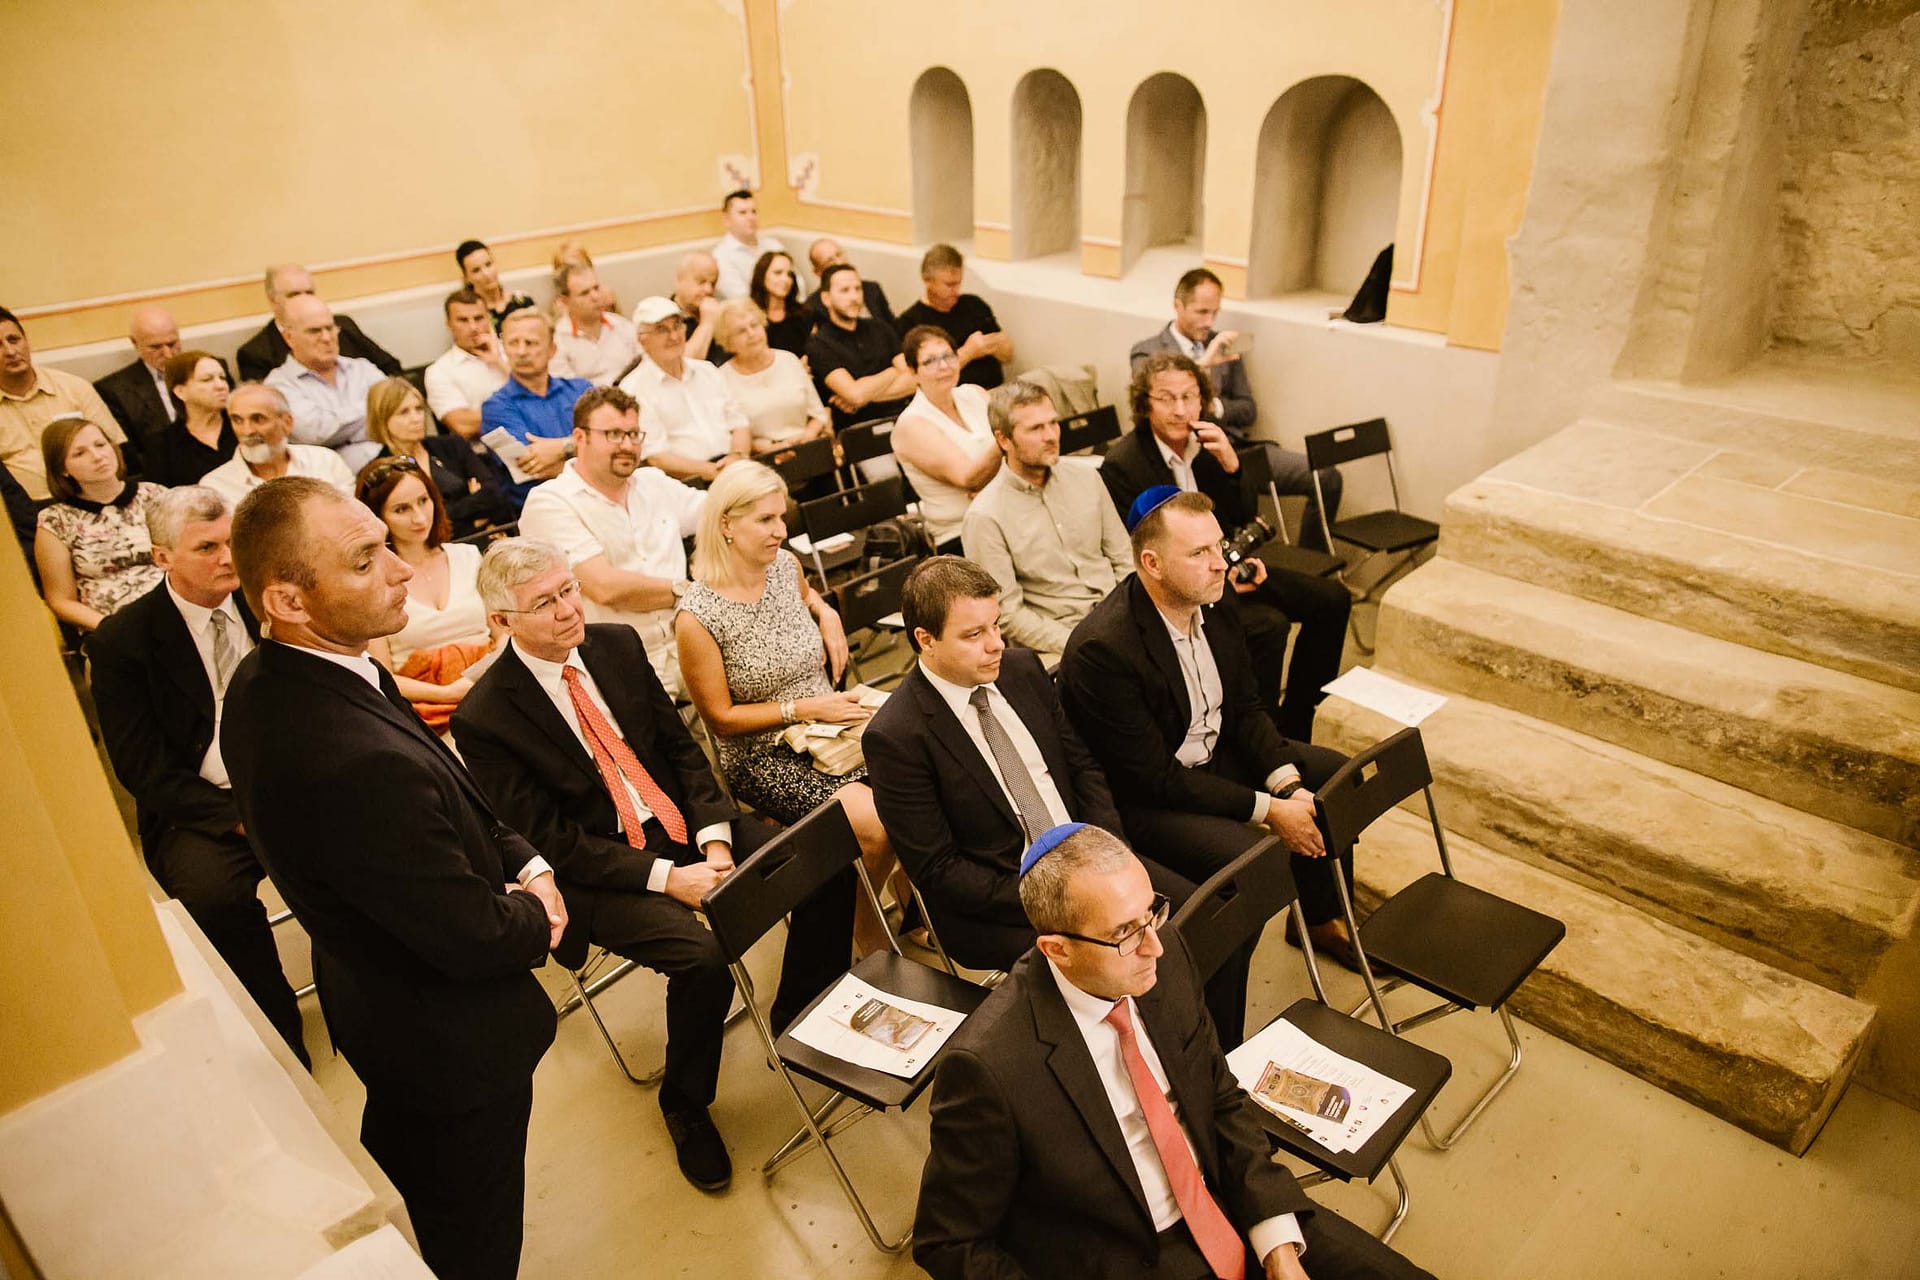 The crowd seated inside the Old Synagogue